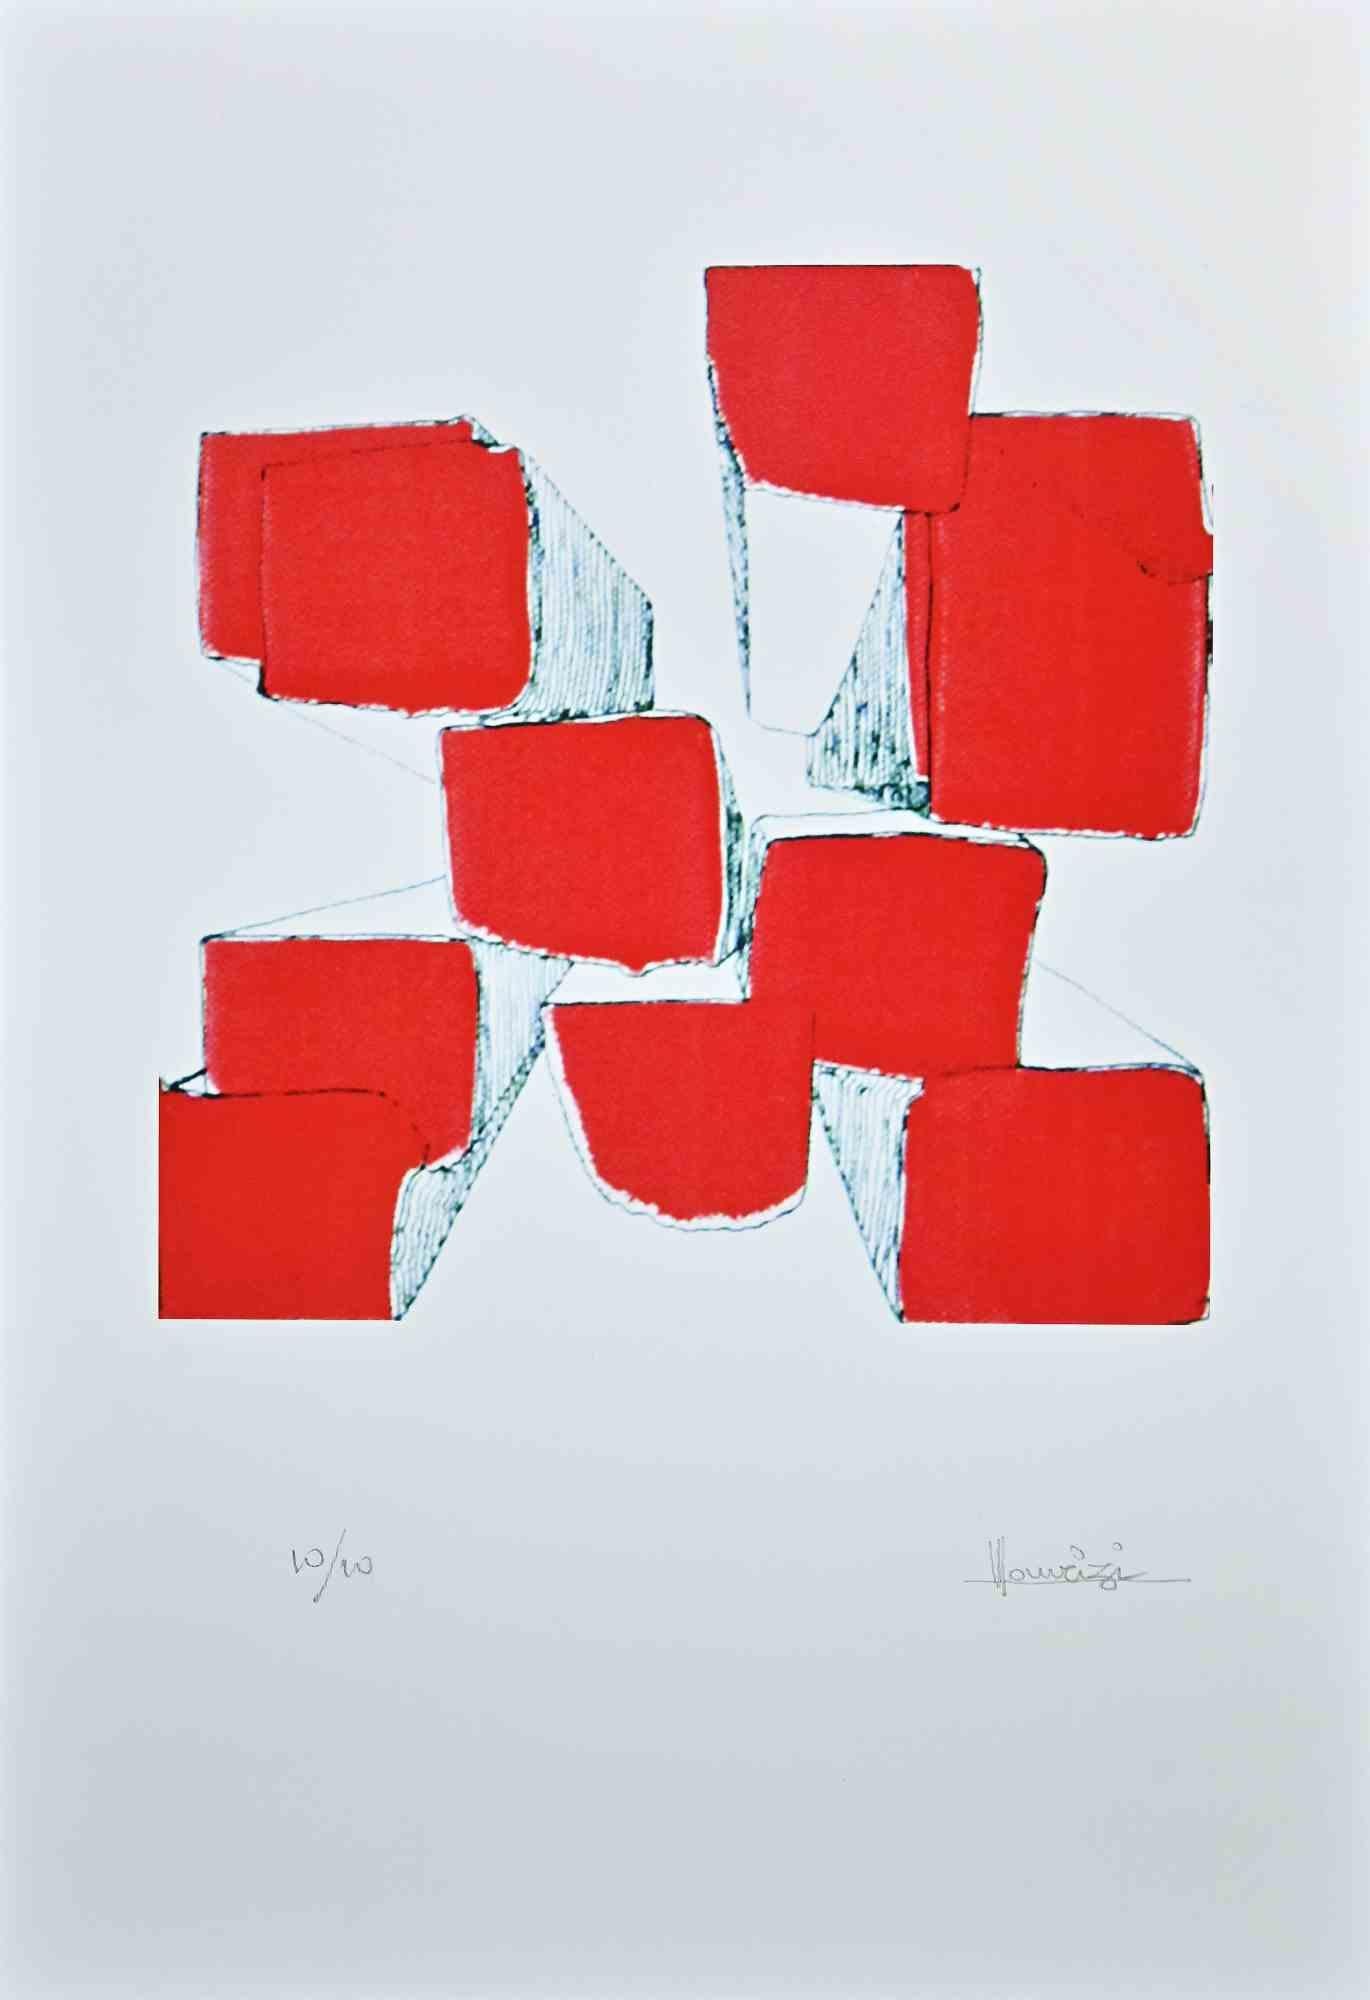 Composition is an original screen print on white paper realized by Italian artist Tonino Maurizi.

Hand-signed on the lower right.

Numbered on the lower left, edition of 10/10 prints.

Very good conditions.